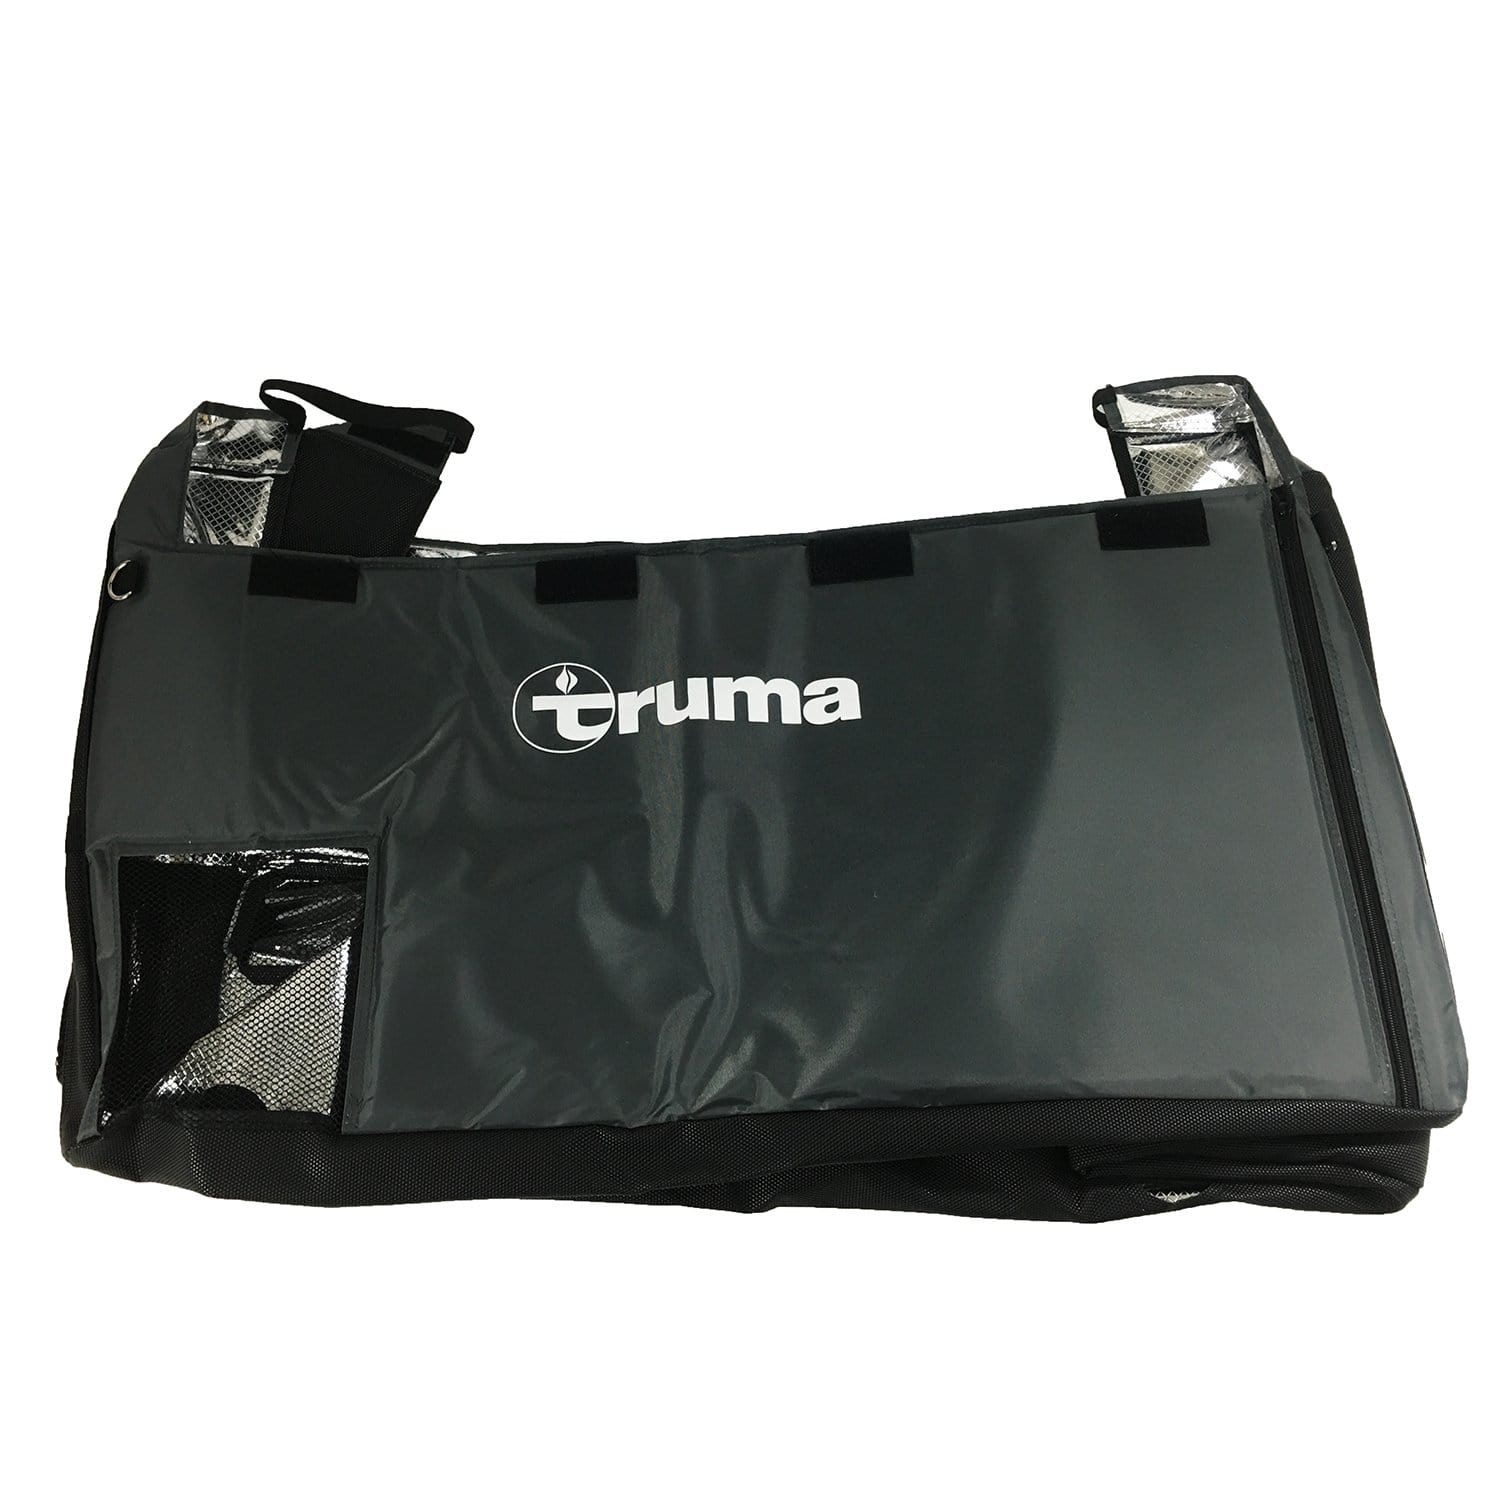 Truma 40956-02 Insulated Cooler Cover for C96DZ